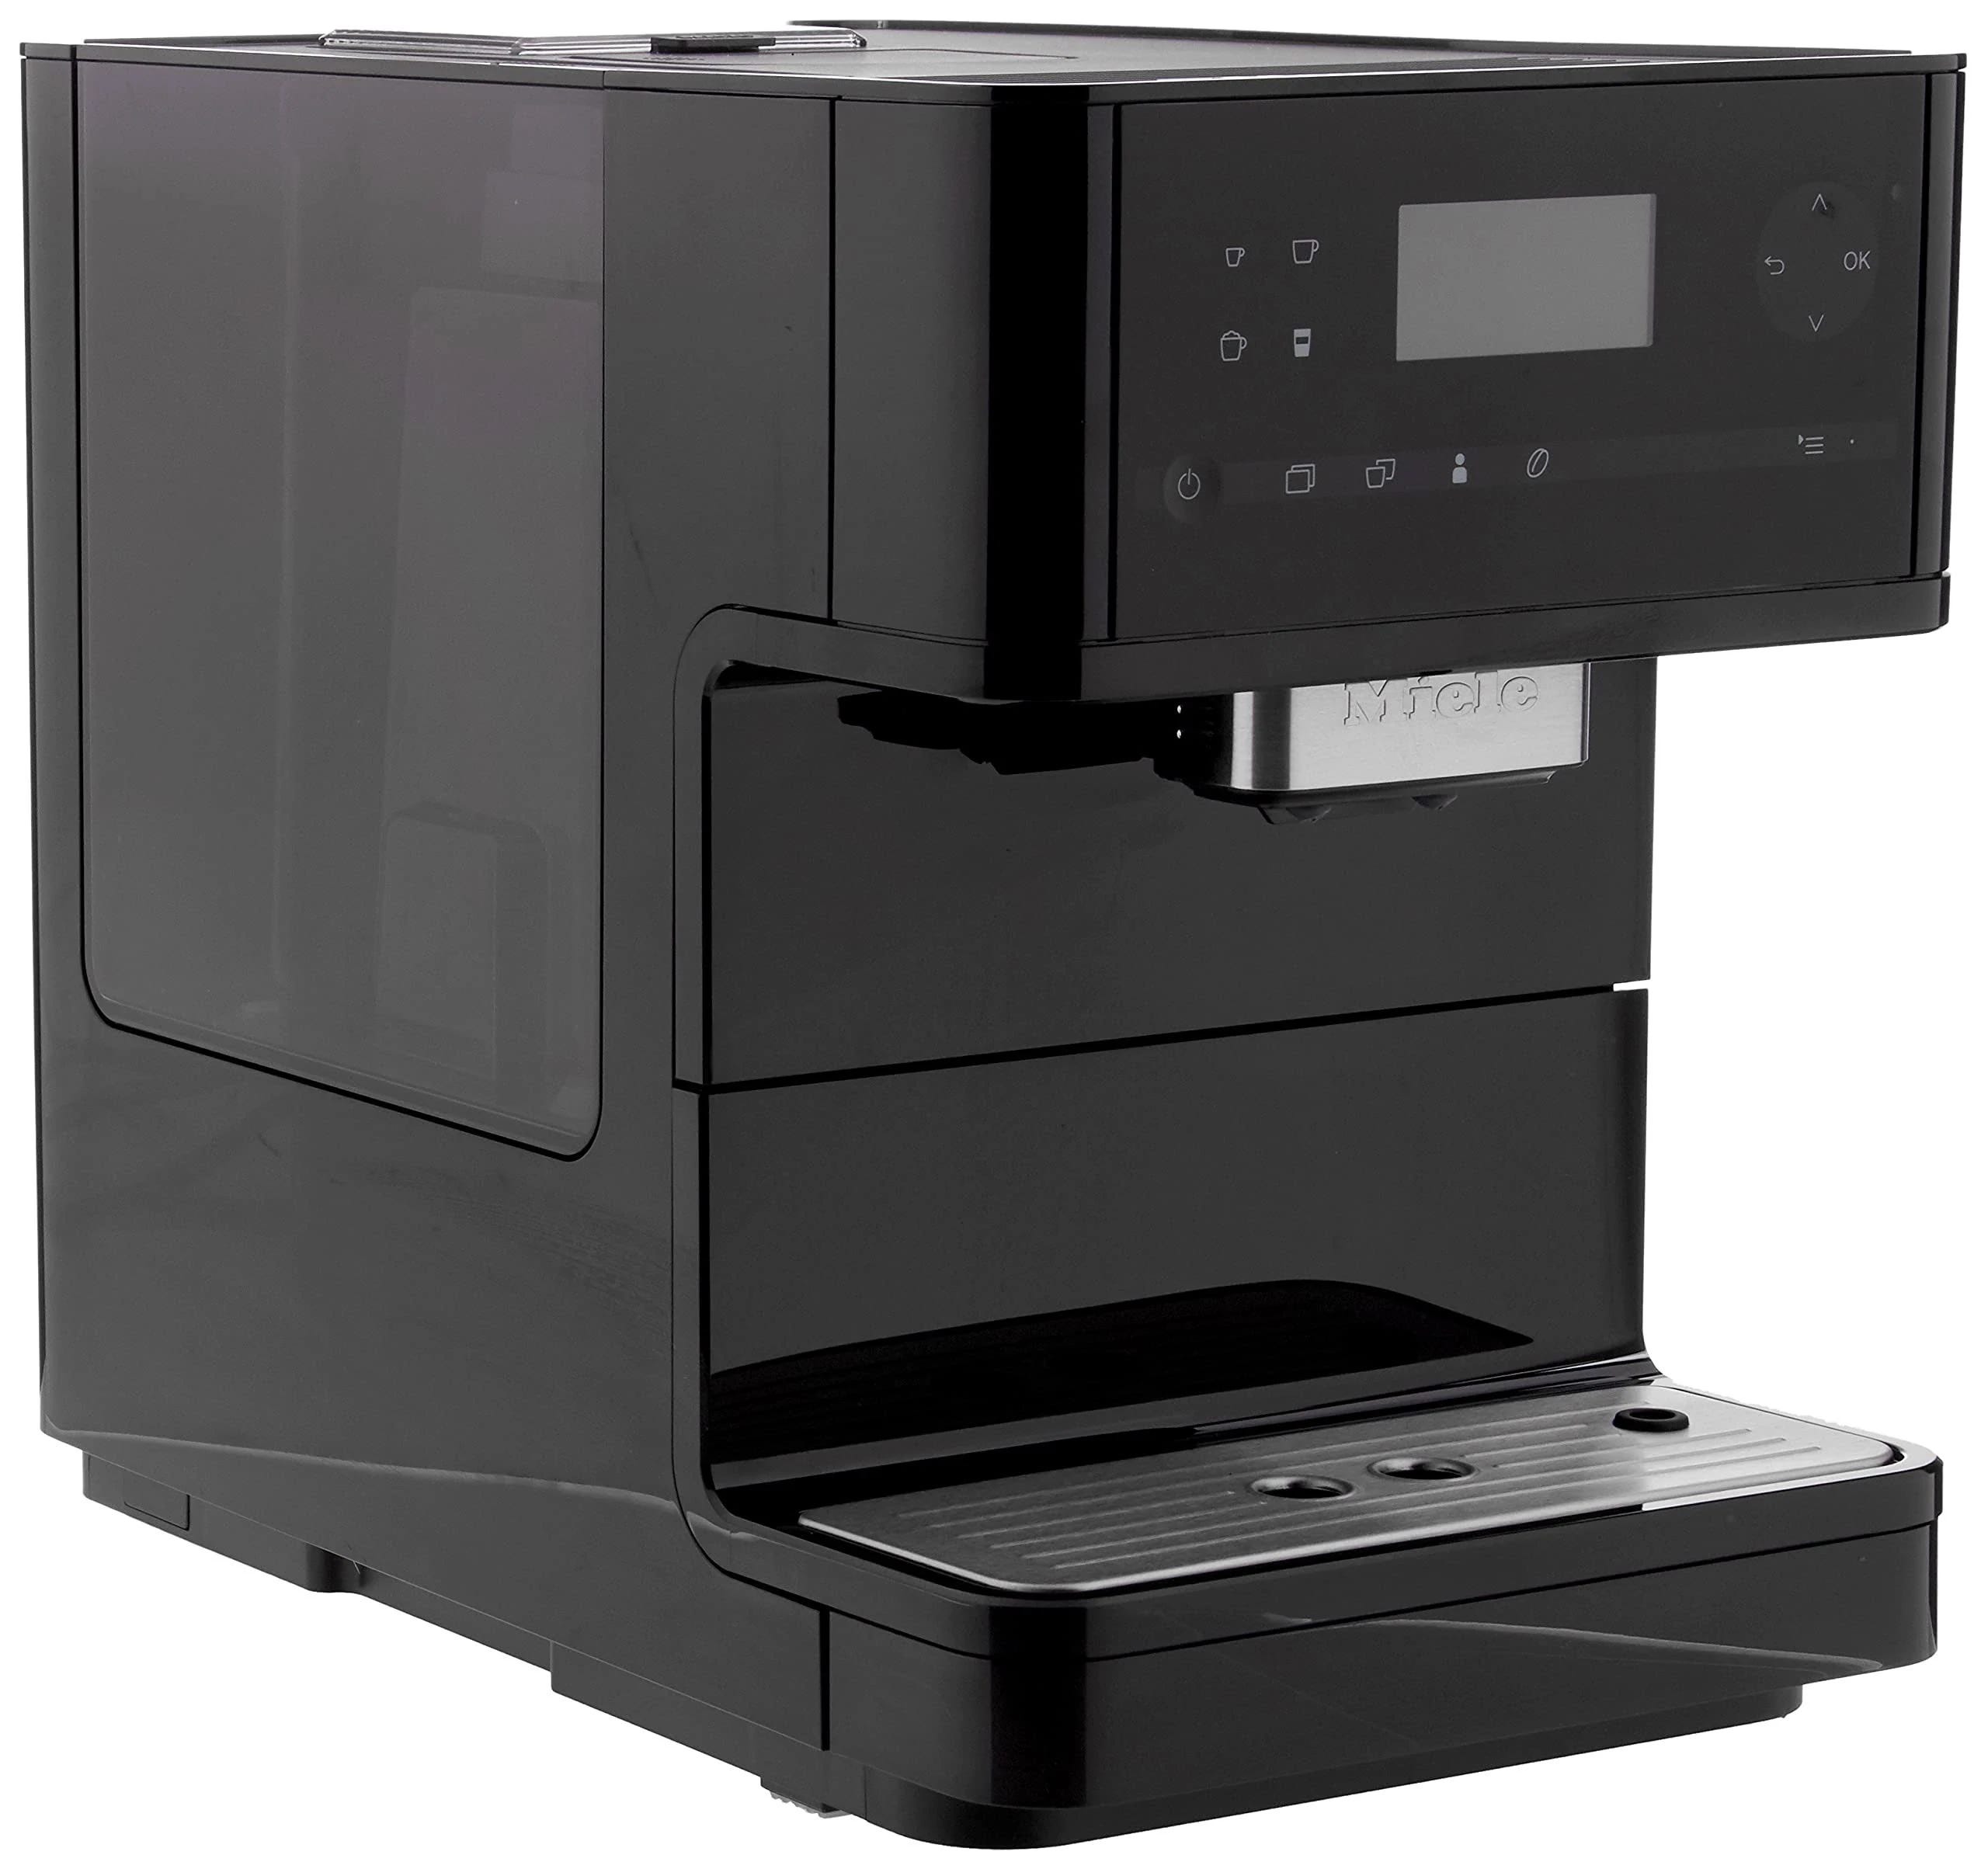 Miele Obsidian Black Countertop Coffee Machine with Perfect Milk Froth and Fully Automatic Controls | Image